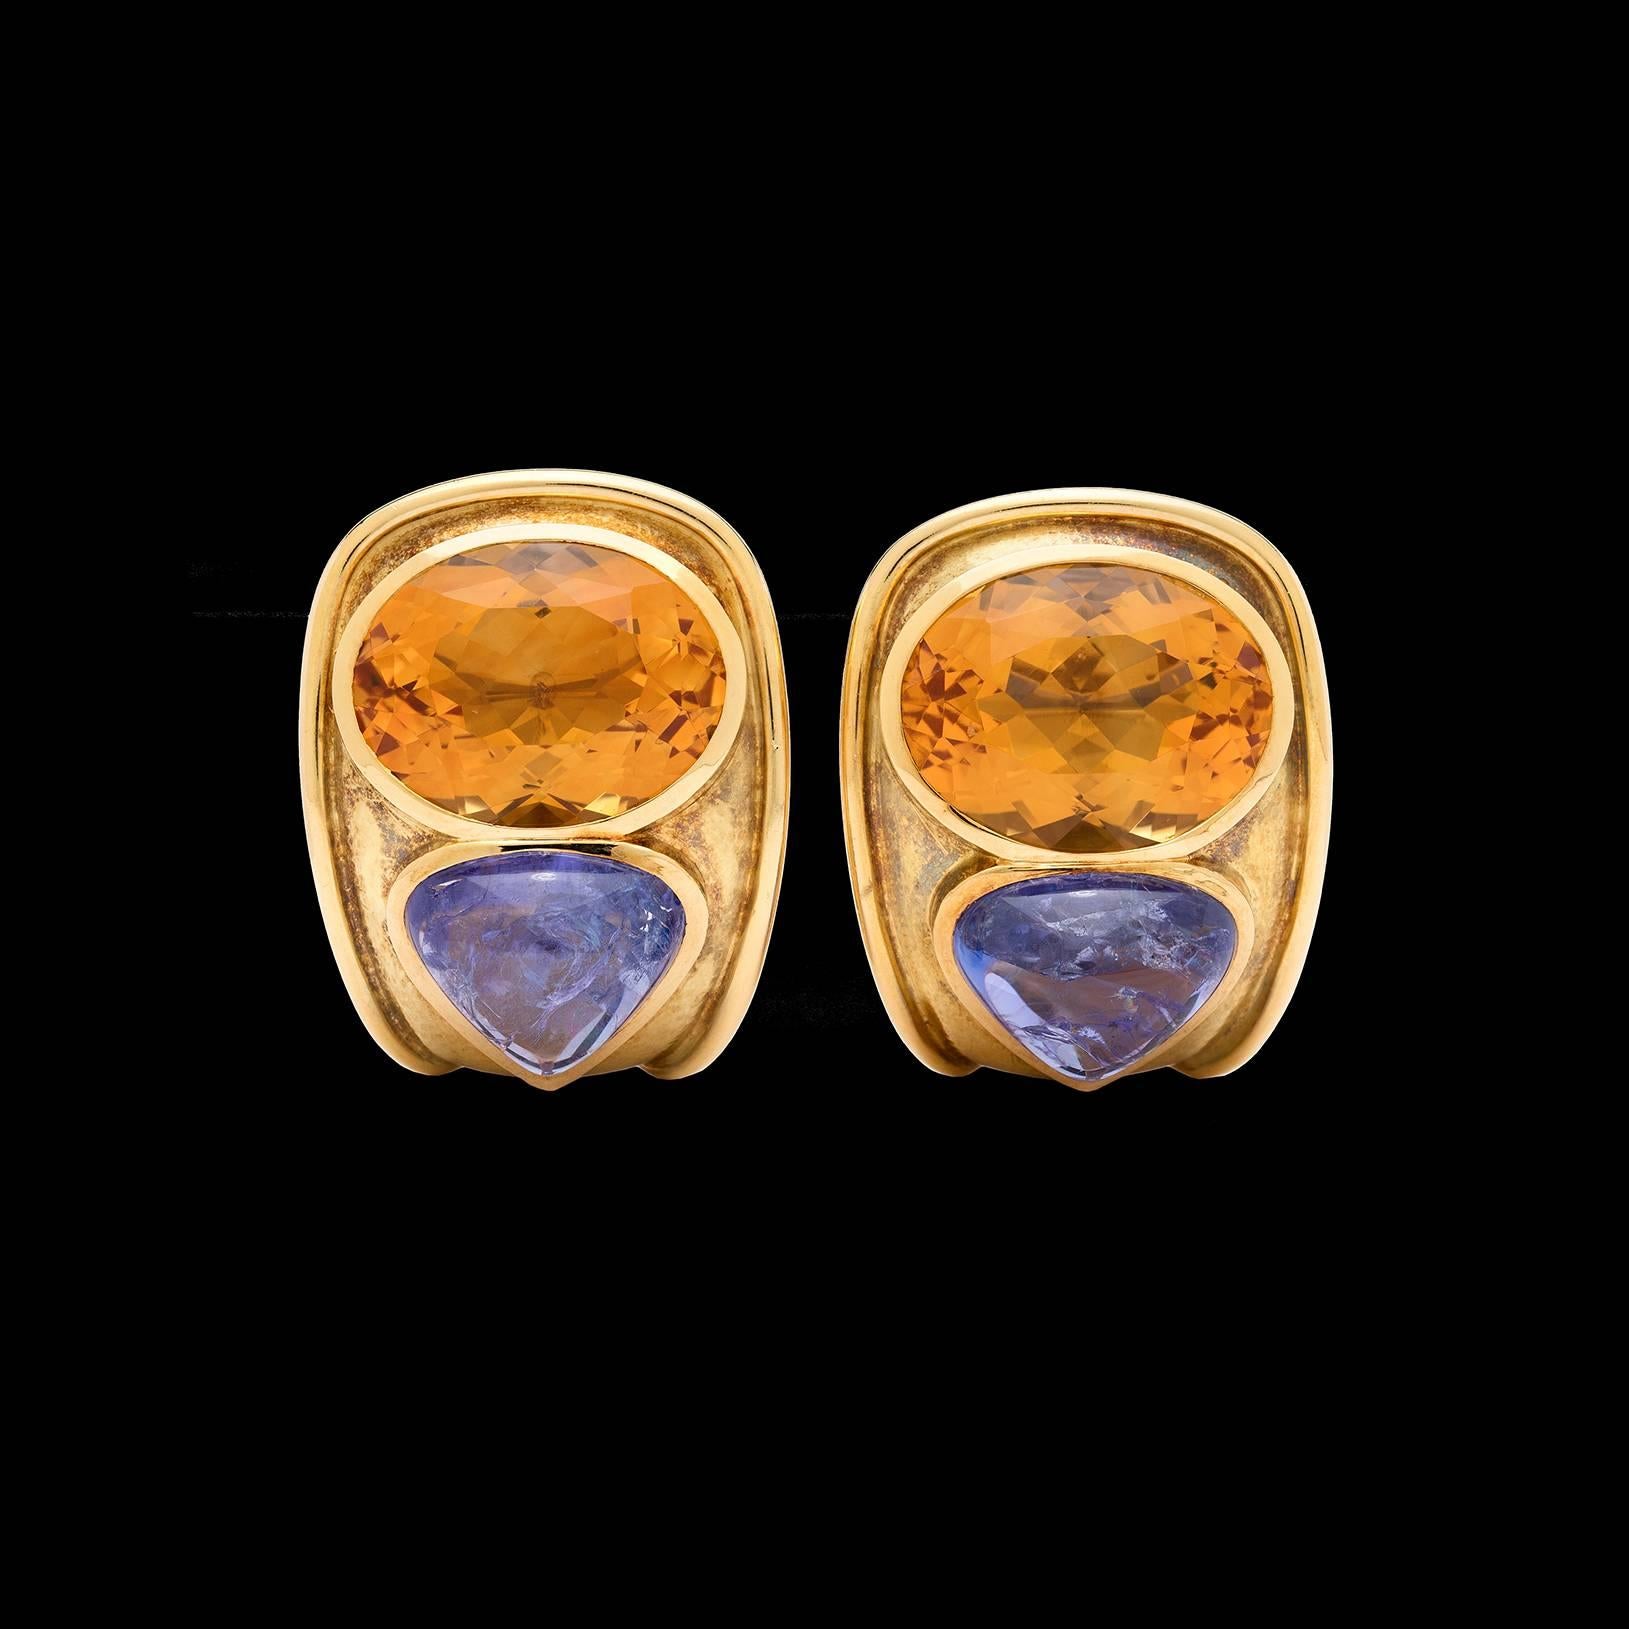 Bold and colorful estate De Vroomen 18k yellow gold clip back earrings from London. These fantastic earrings feature two large oval cut citrine quartz bezel set alongside two cabochon tanzanites. The earrings measure 1 1/8 inch long by 1 inch wide